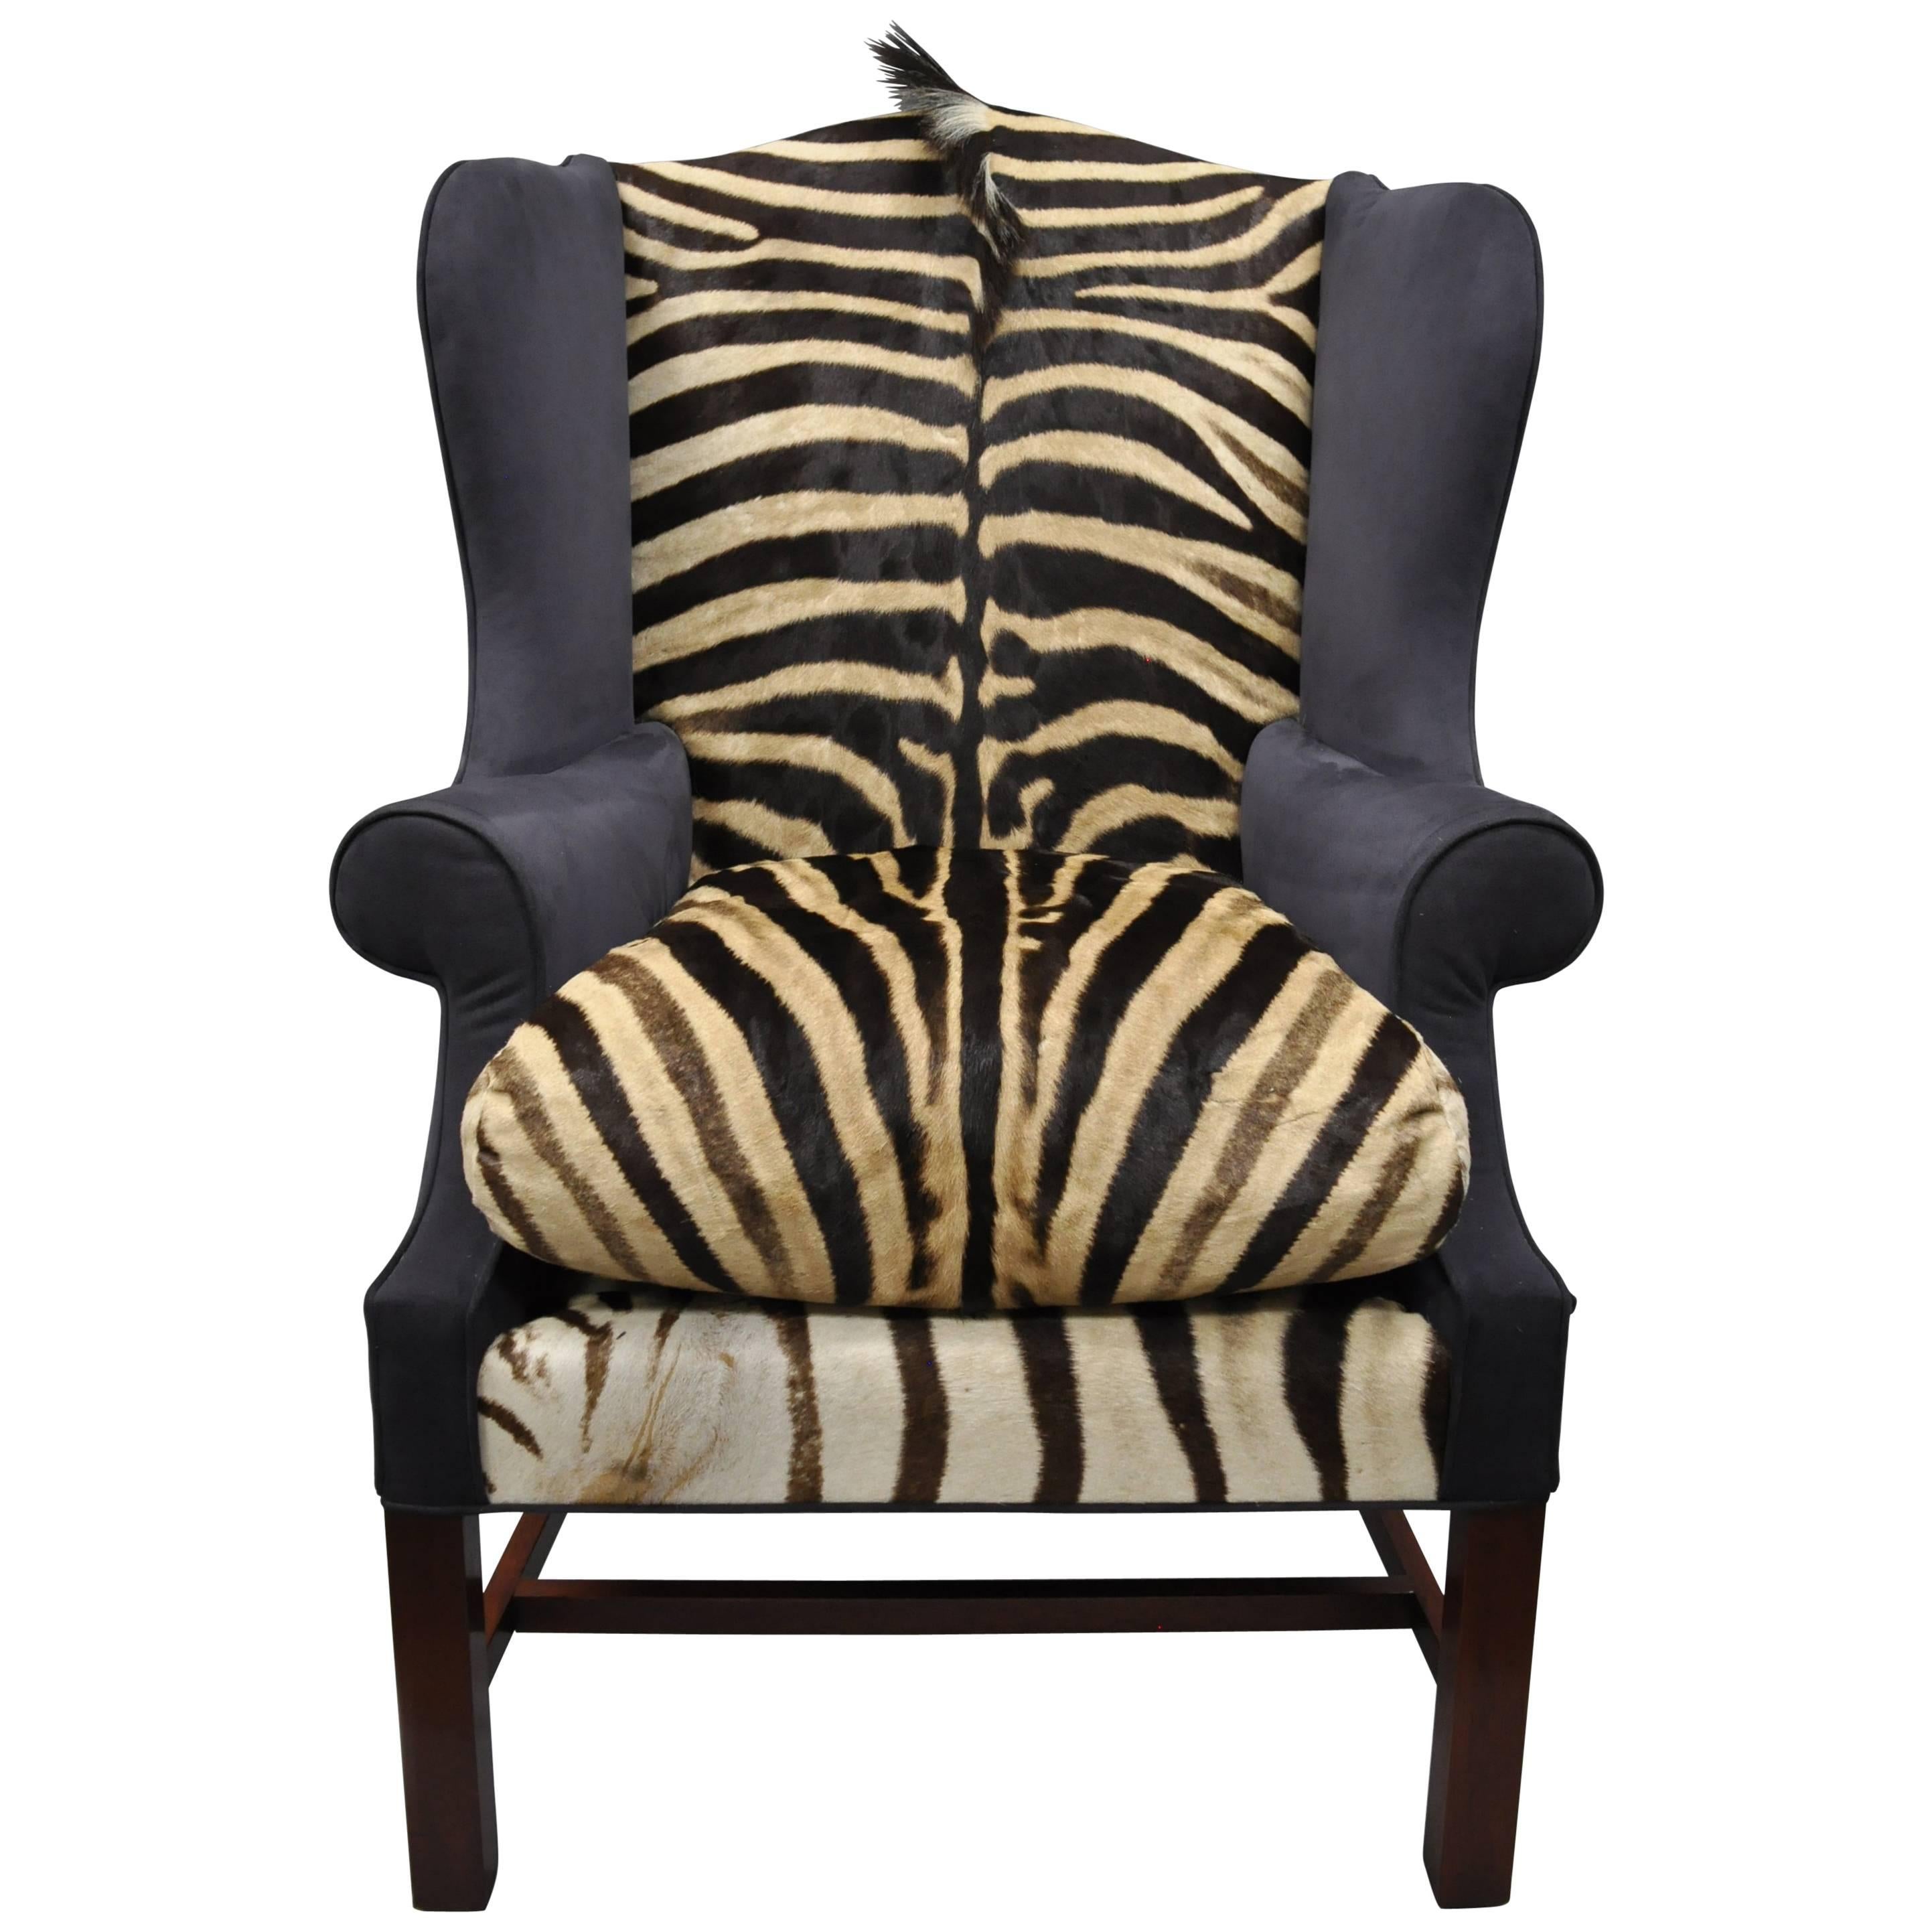 Zebra Hide Blue Suede Mahogany English Georgian Style Wingback Library Chair